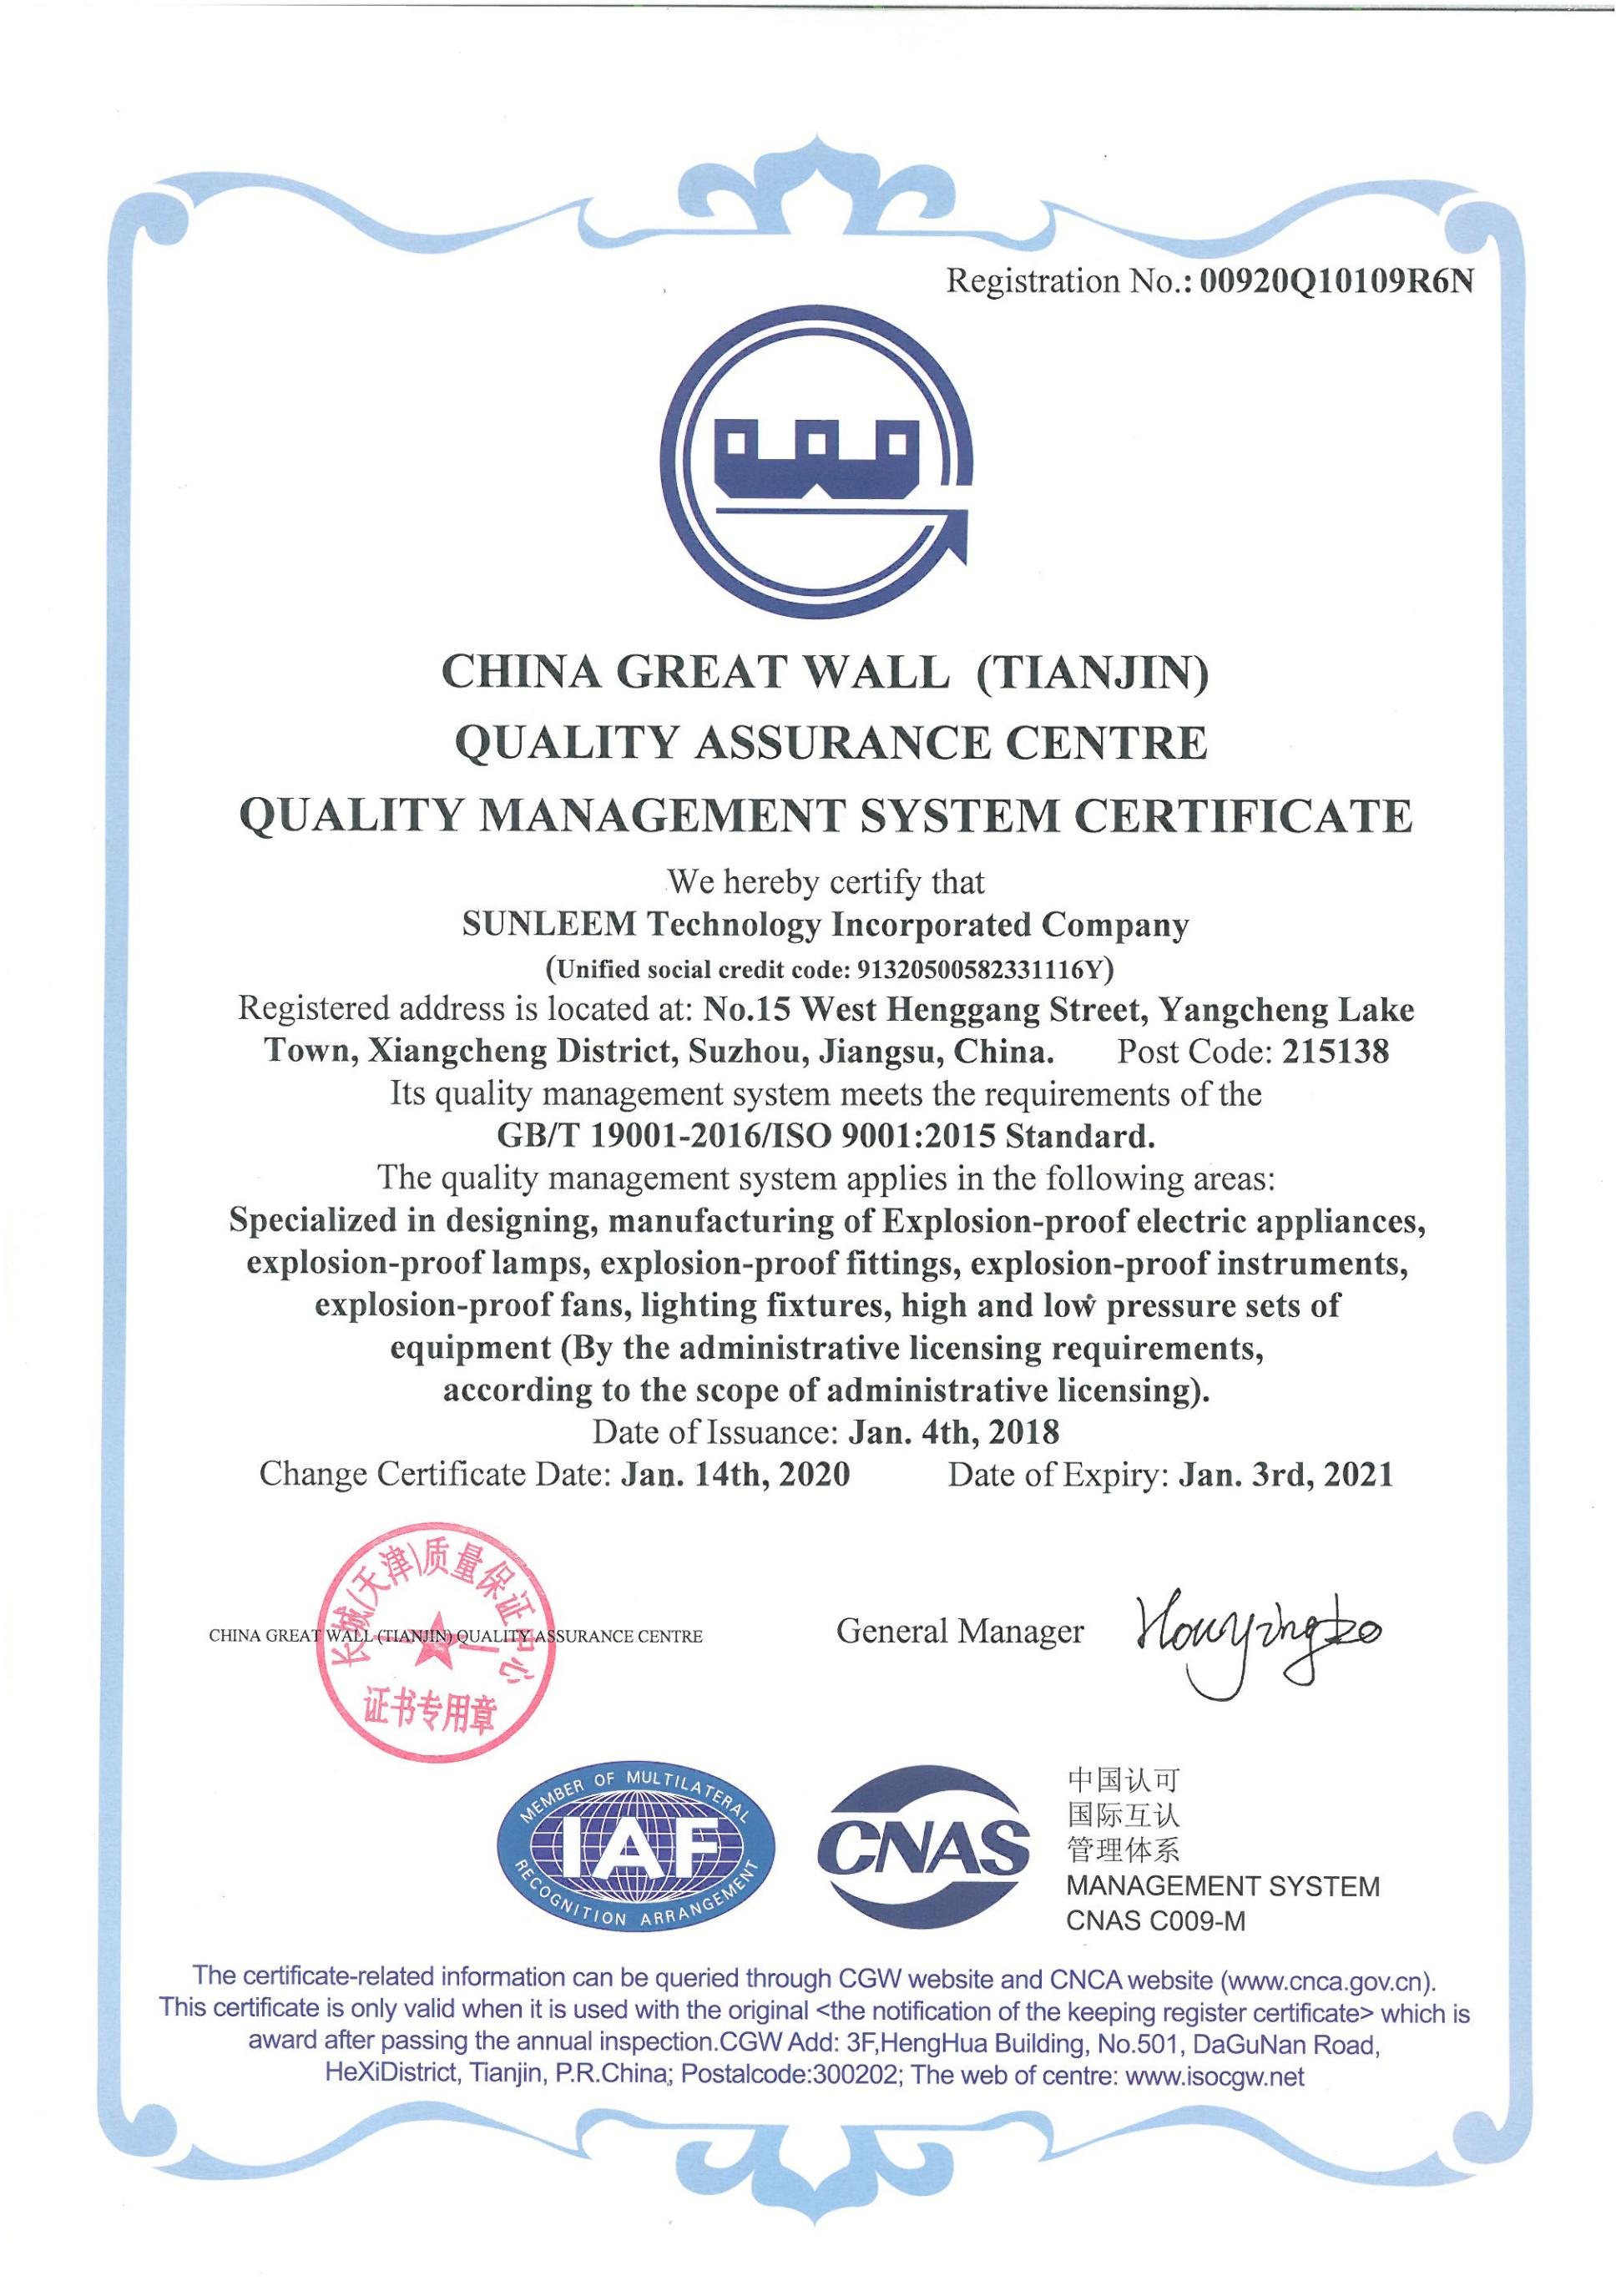  QUALITY MANAGEMENT SYSTEM CERTIFICATE